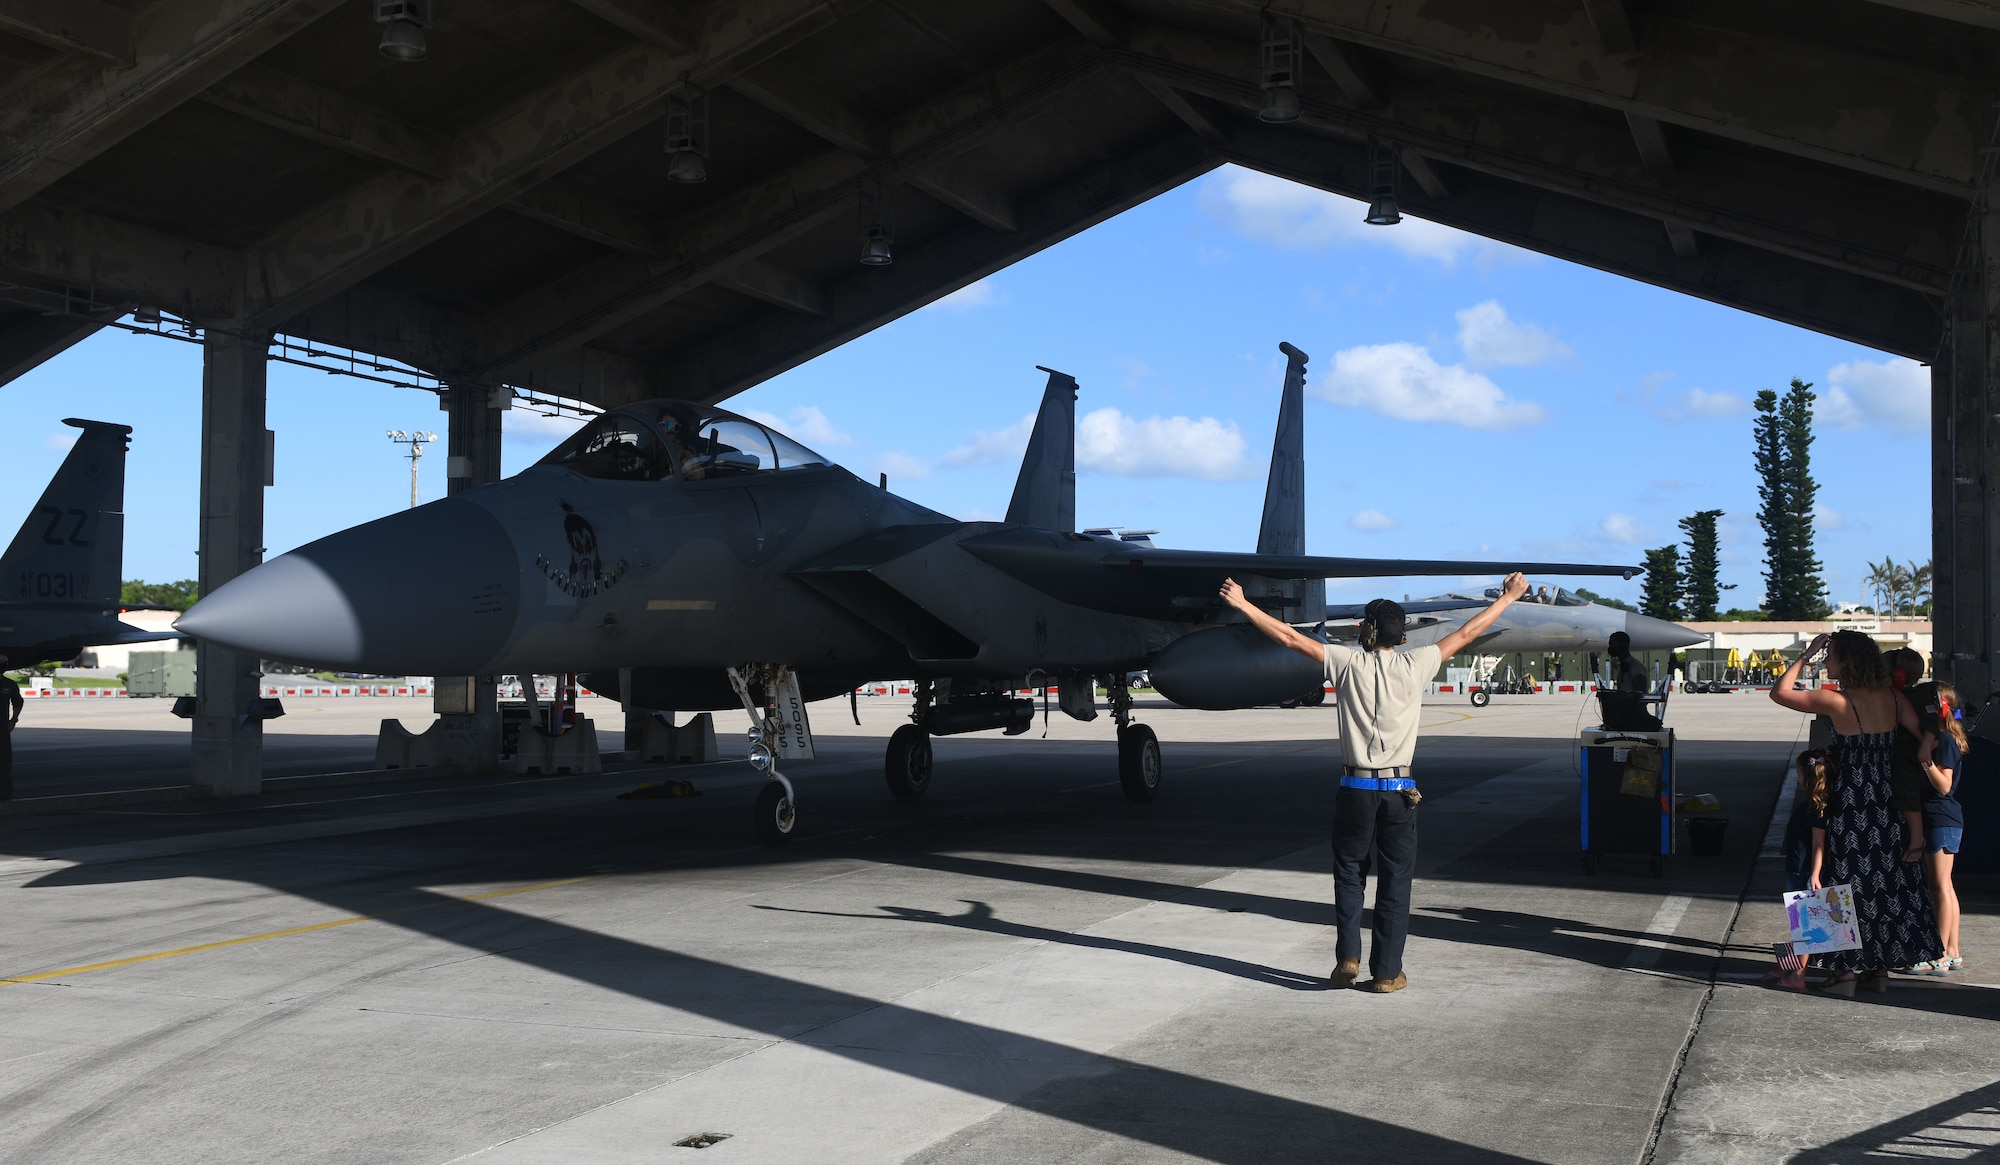 A U.S Air Force F-15C Eagle assigned to the 44th Fighter Squadron pulls into a parking spot Oct. 3, 2020, at Kadena Air Base, Japan. More than 300 Airmen assigned to the 18th Operations and Maintenance Groups as well as pilots and aircraft assigned to the 44th Fighter Squadron deployed to the U.S. Central Command theater to defend U.S. and partner nation interests. During their deployment, Airmen conducted more than 1,000 sorties and 5,300 combat hours, which drove 13 phase inspections in six months. They’ll share the skills they learned in combat with Team Kadena, joint partners and allies to ensure a free and open Indo-Pacific. (U.S. Air Force photo by Tech. Sgt. Benjamin Sutton)